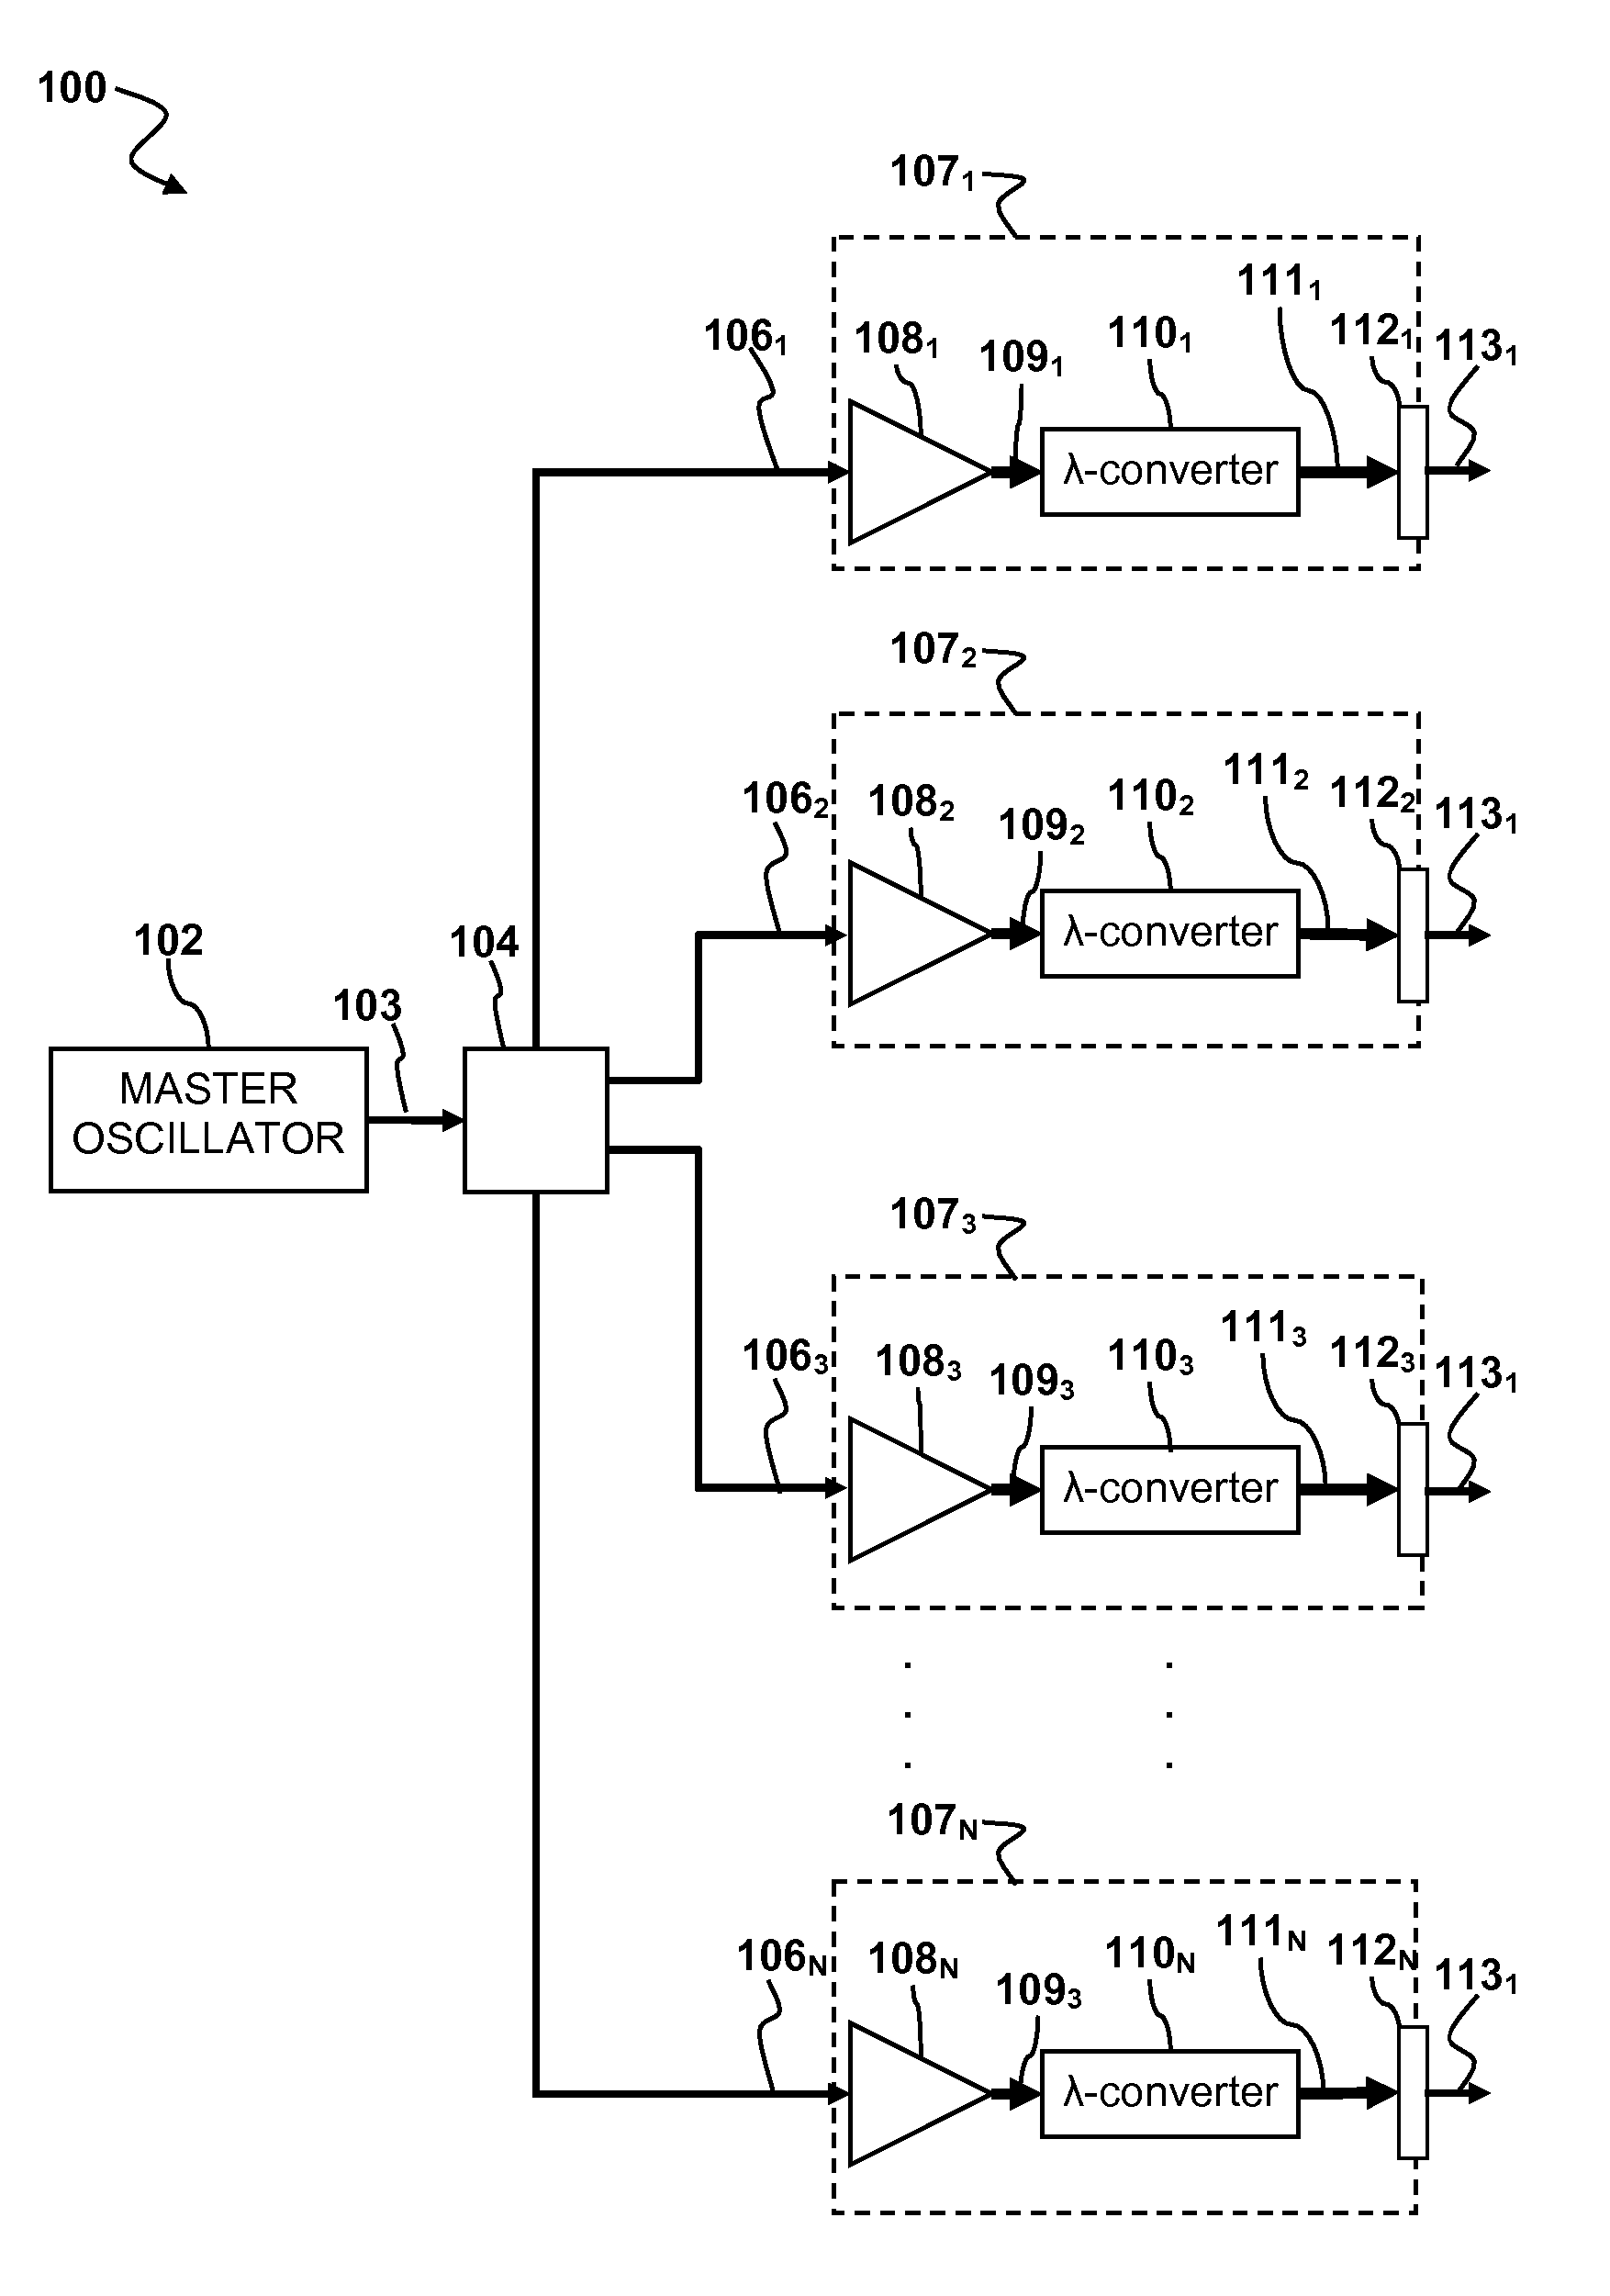 Laser apparatus having multiple synchronous amplifiers tied to one master oscillator